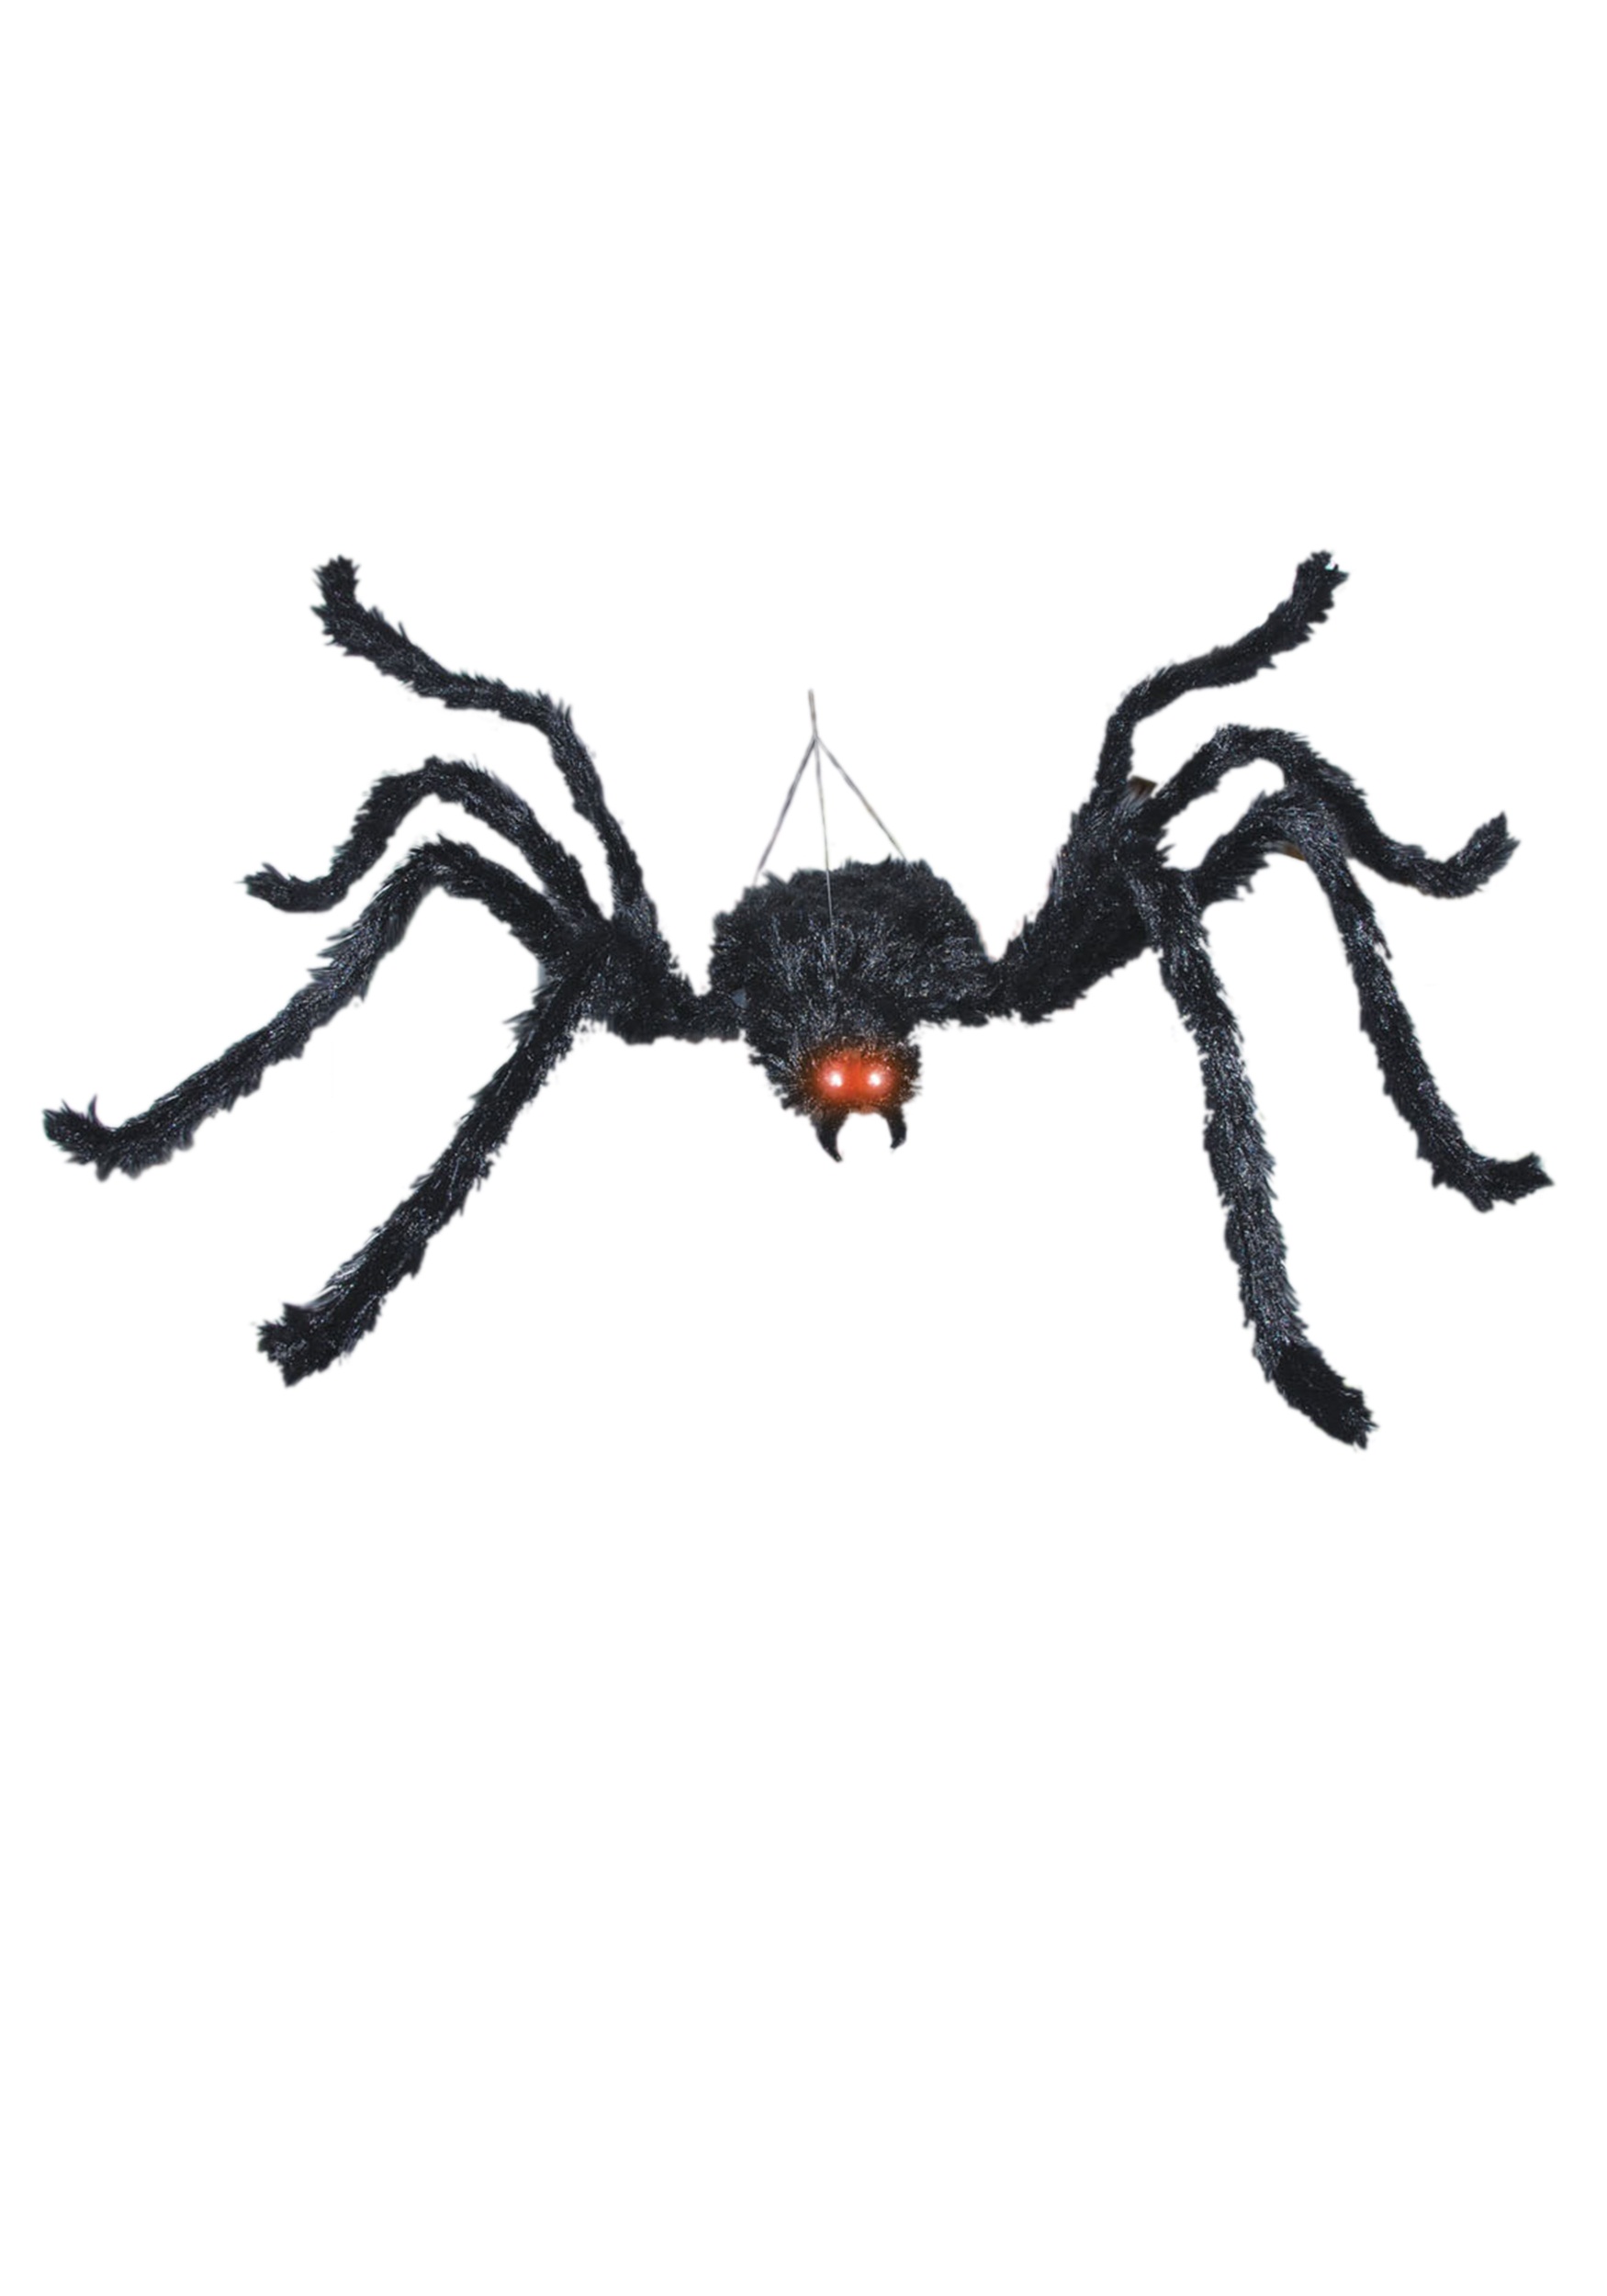 Animated Pictures Of Spiders | Free Download Clip Art | Free Clip ...